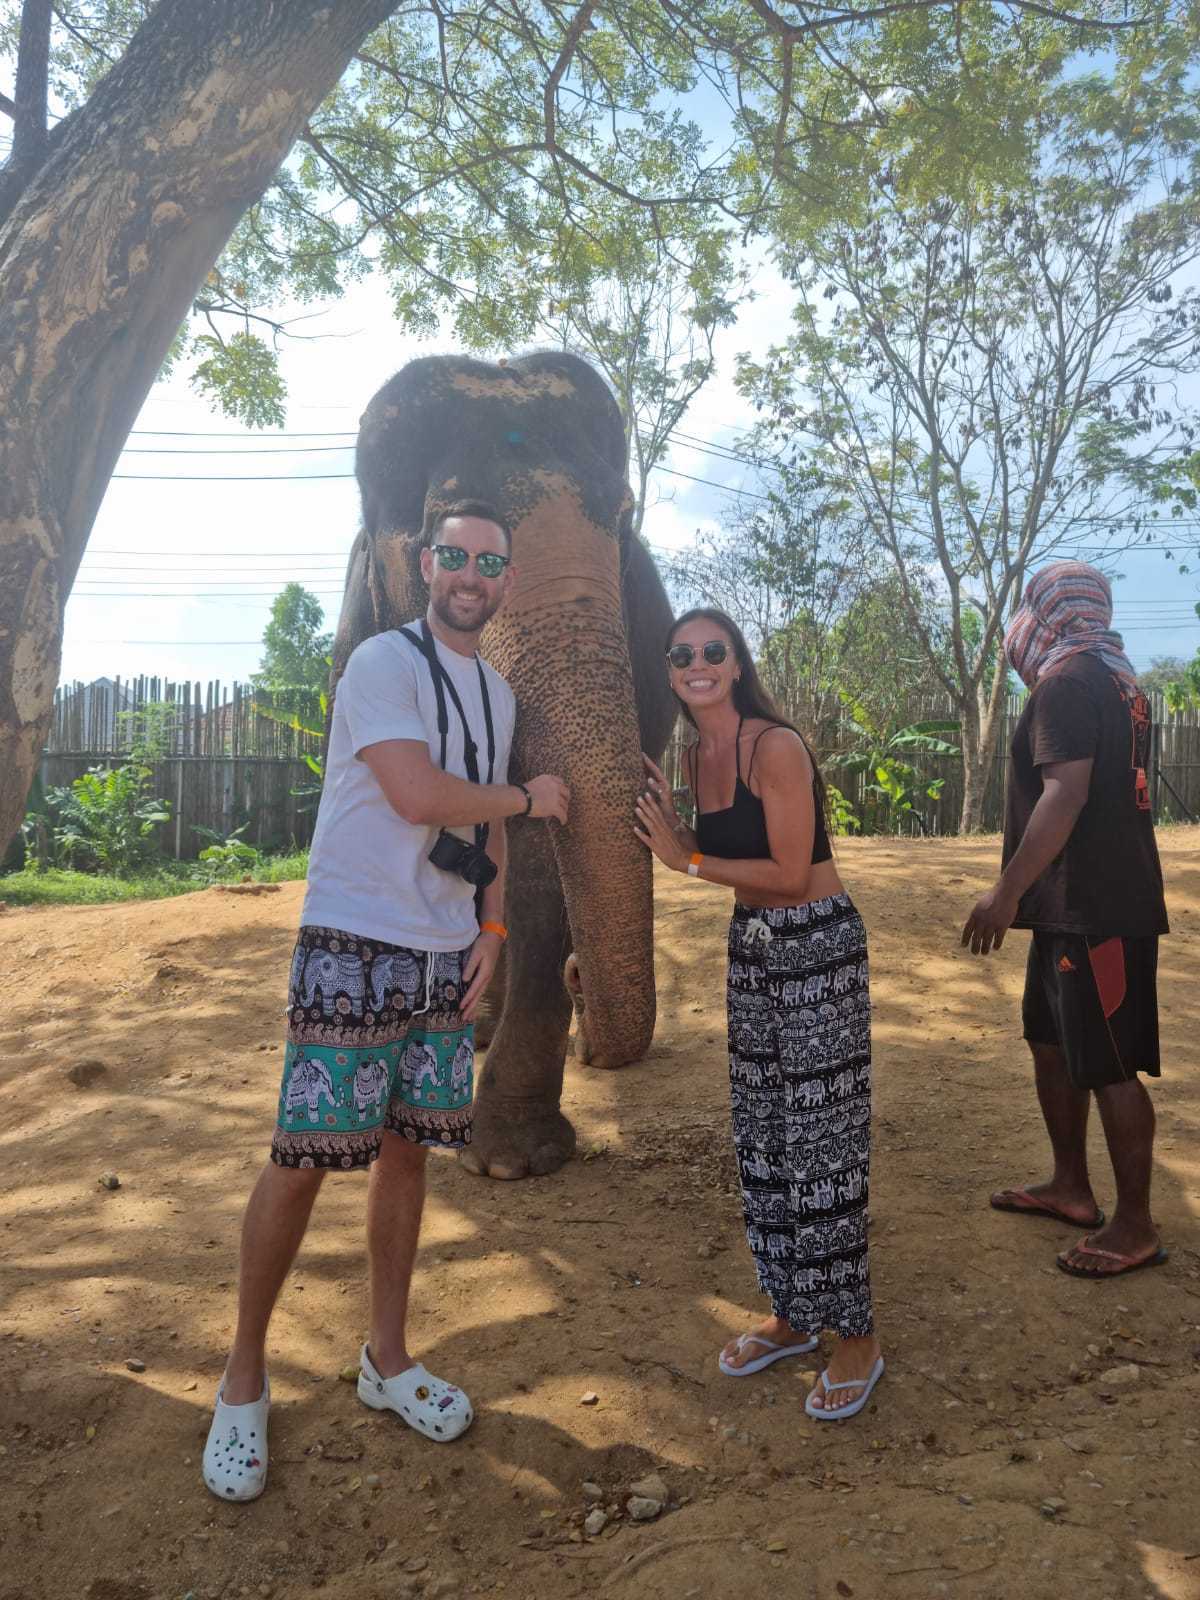 A man and a woman standing in front of an elephant.